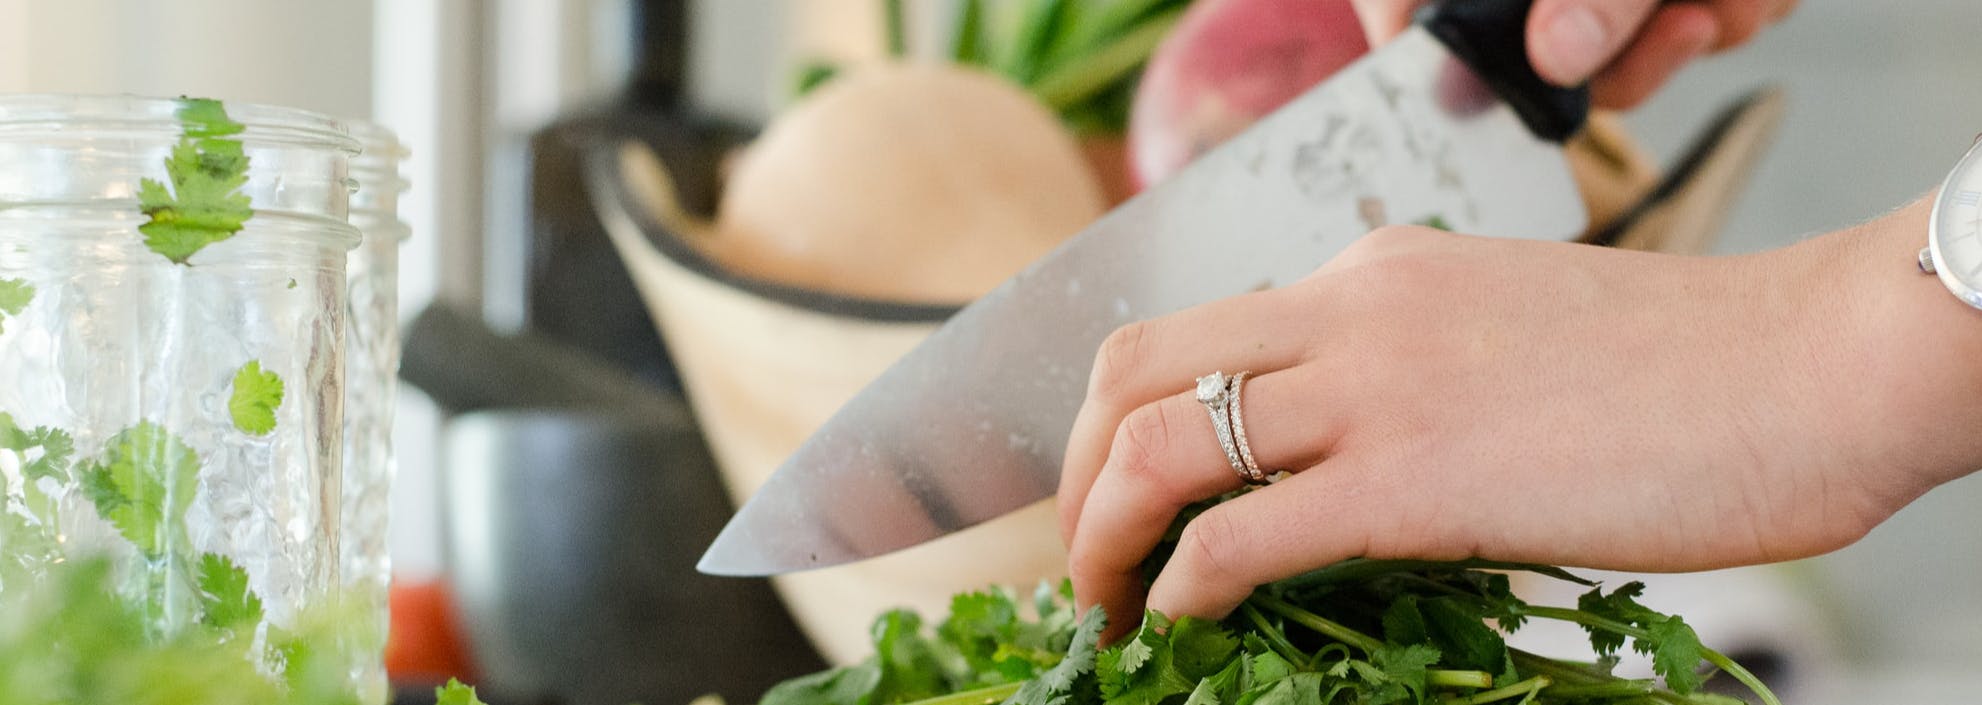 Close up of a pair of female hands chopping green herbs with a large knife with kitchen items in the background